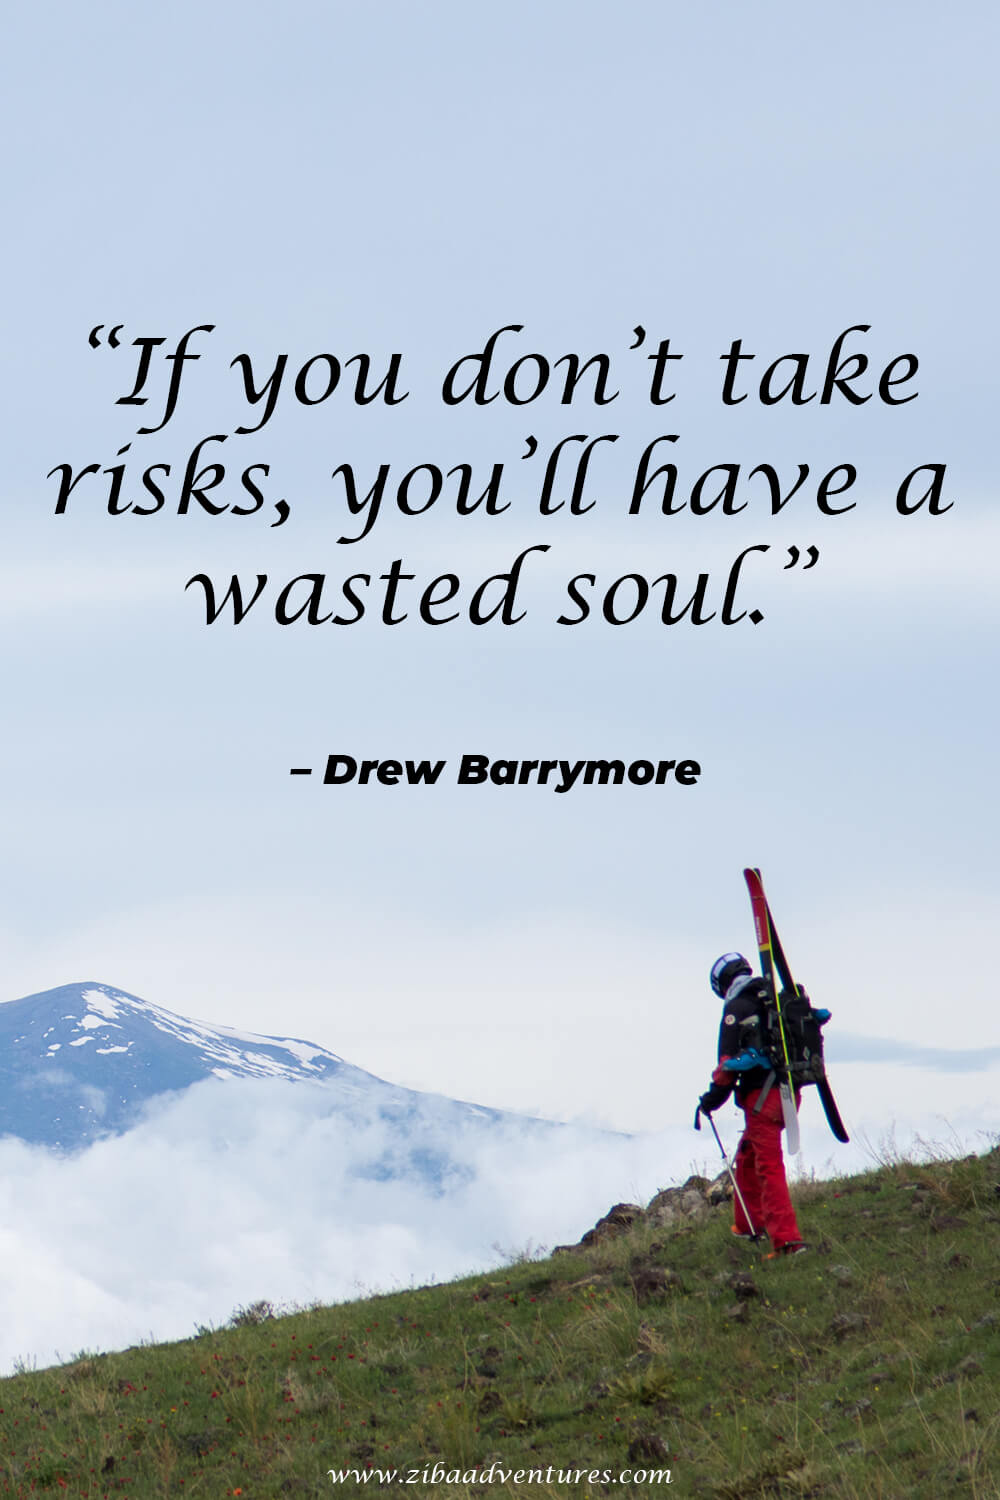 Top Adventure Quotes - Travel Inspiration to for your next adventure ...